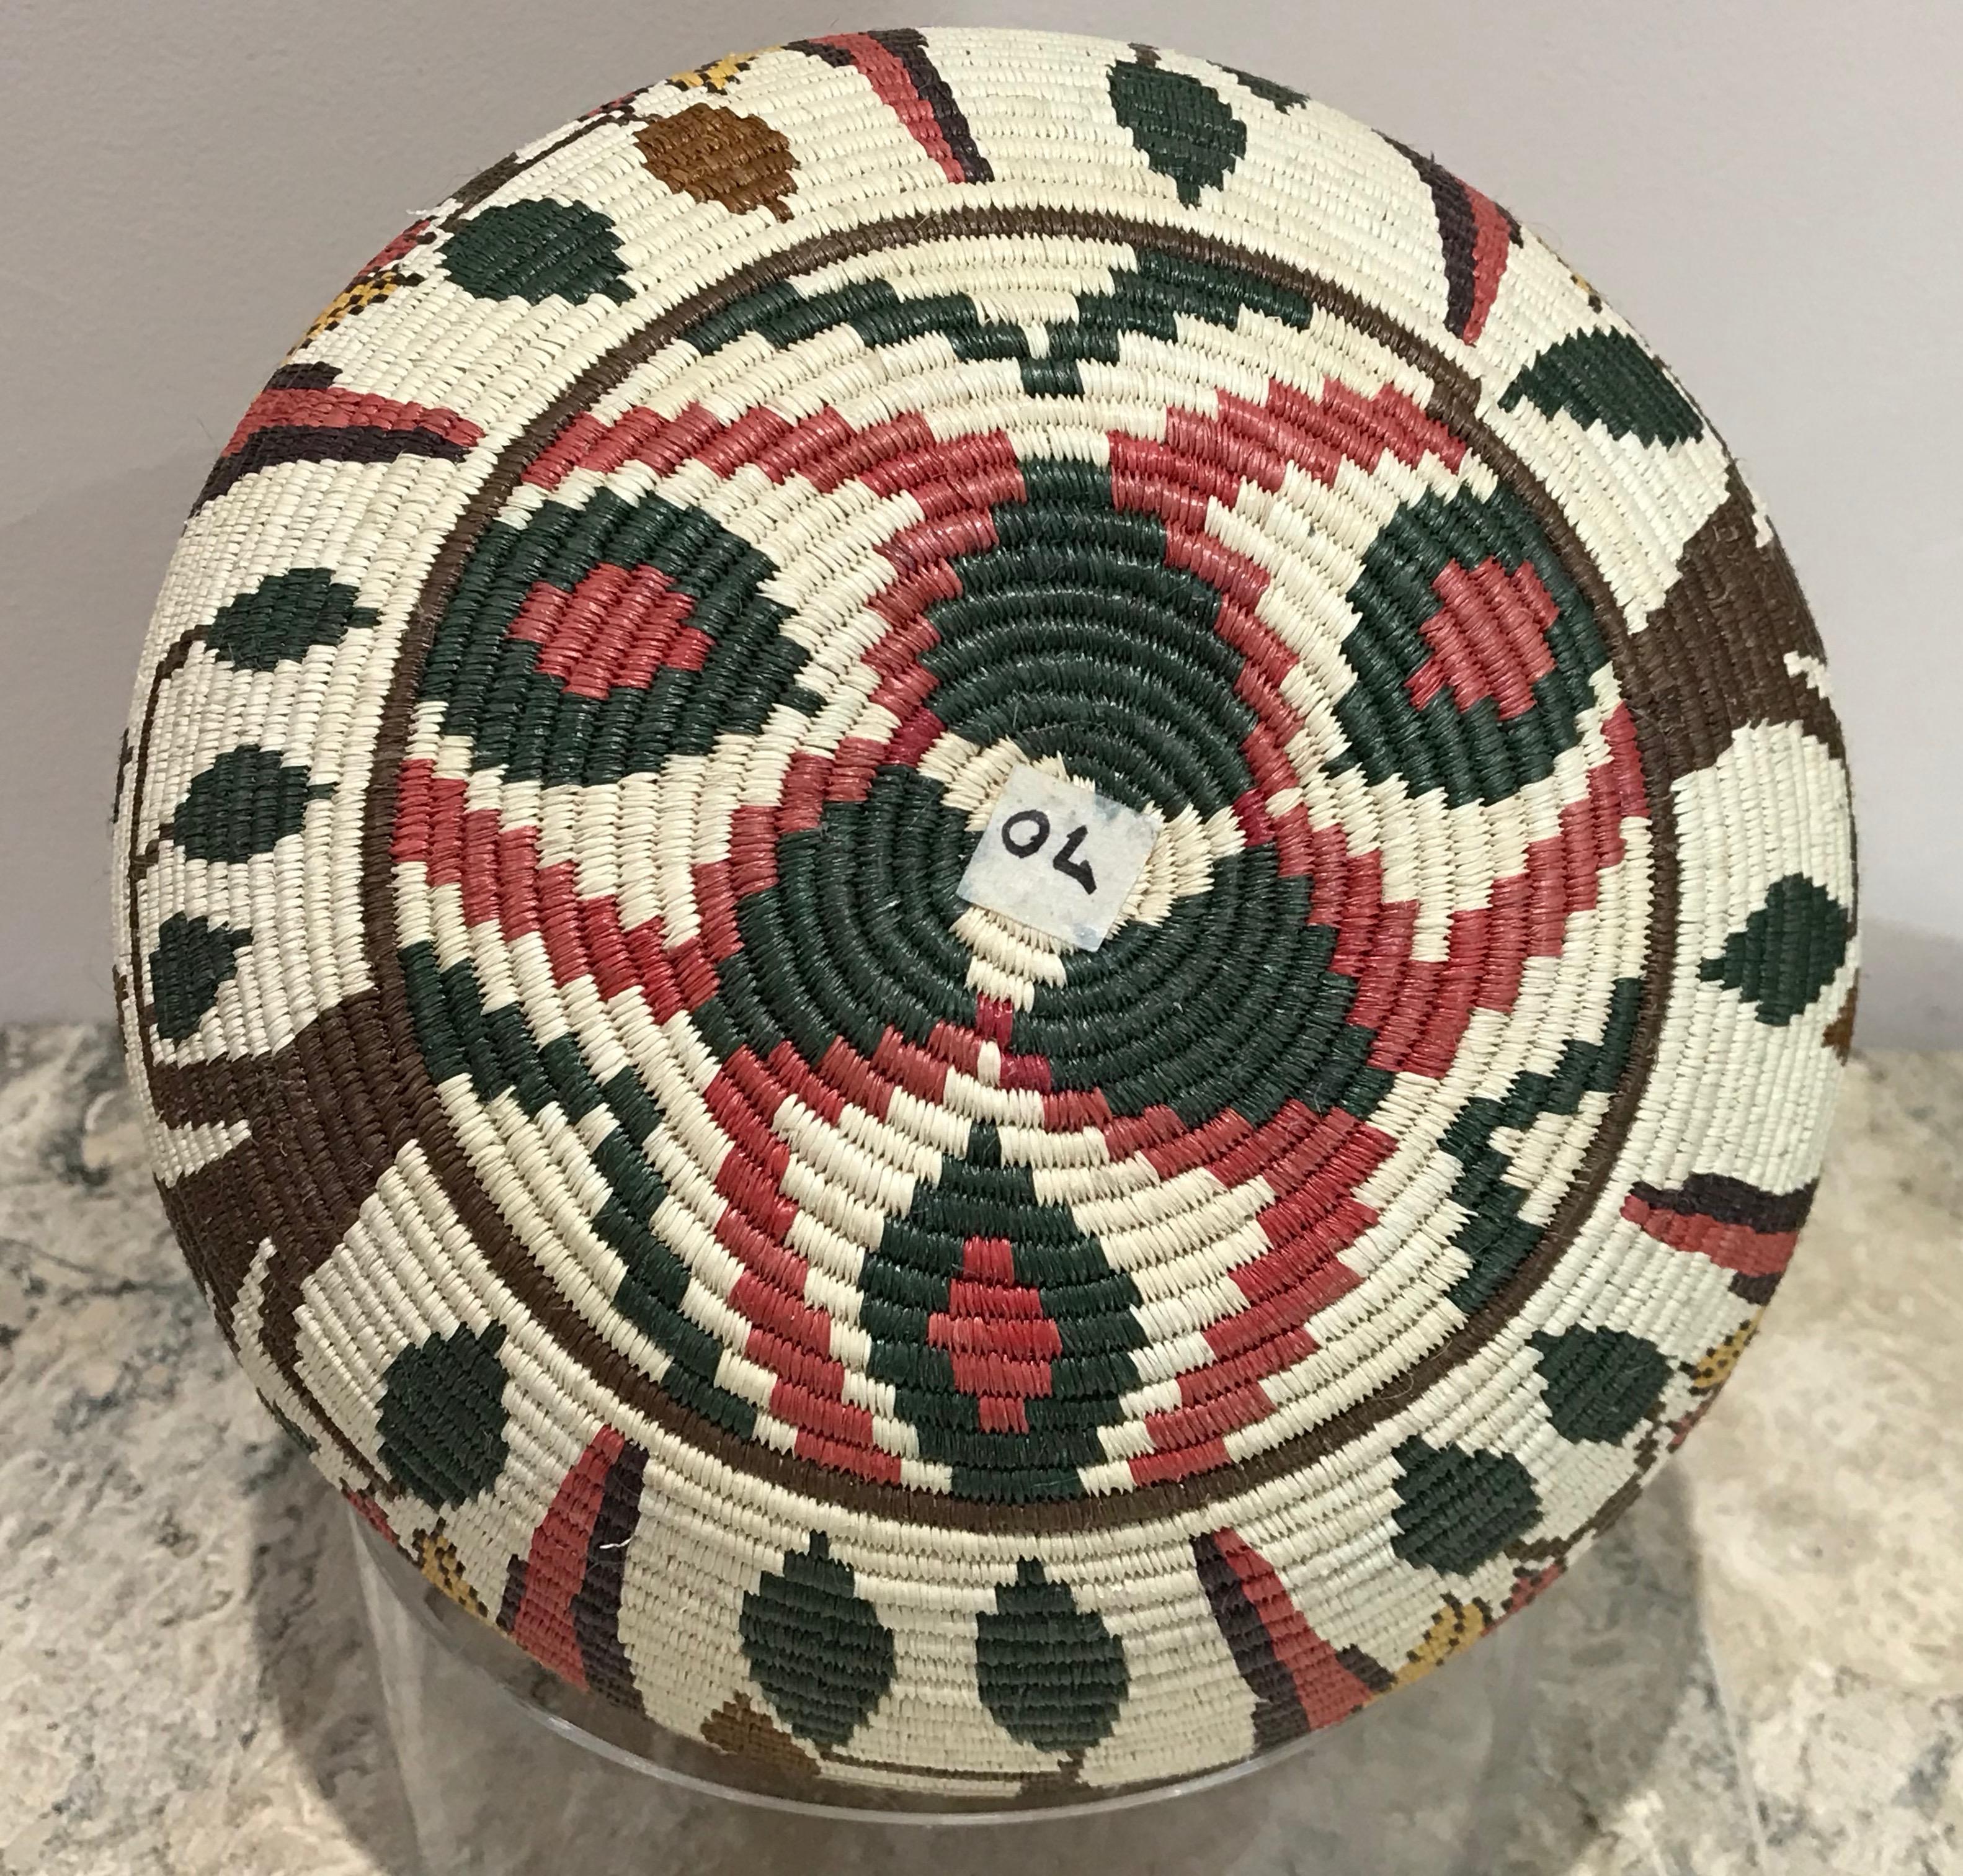 Parrot basket, Wounaan Tribe Darien Rainforest Panama, red, yellow, black, white - Tribal Art by Unknown